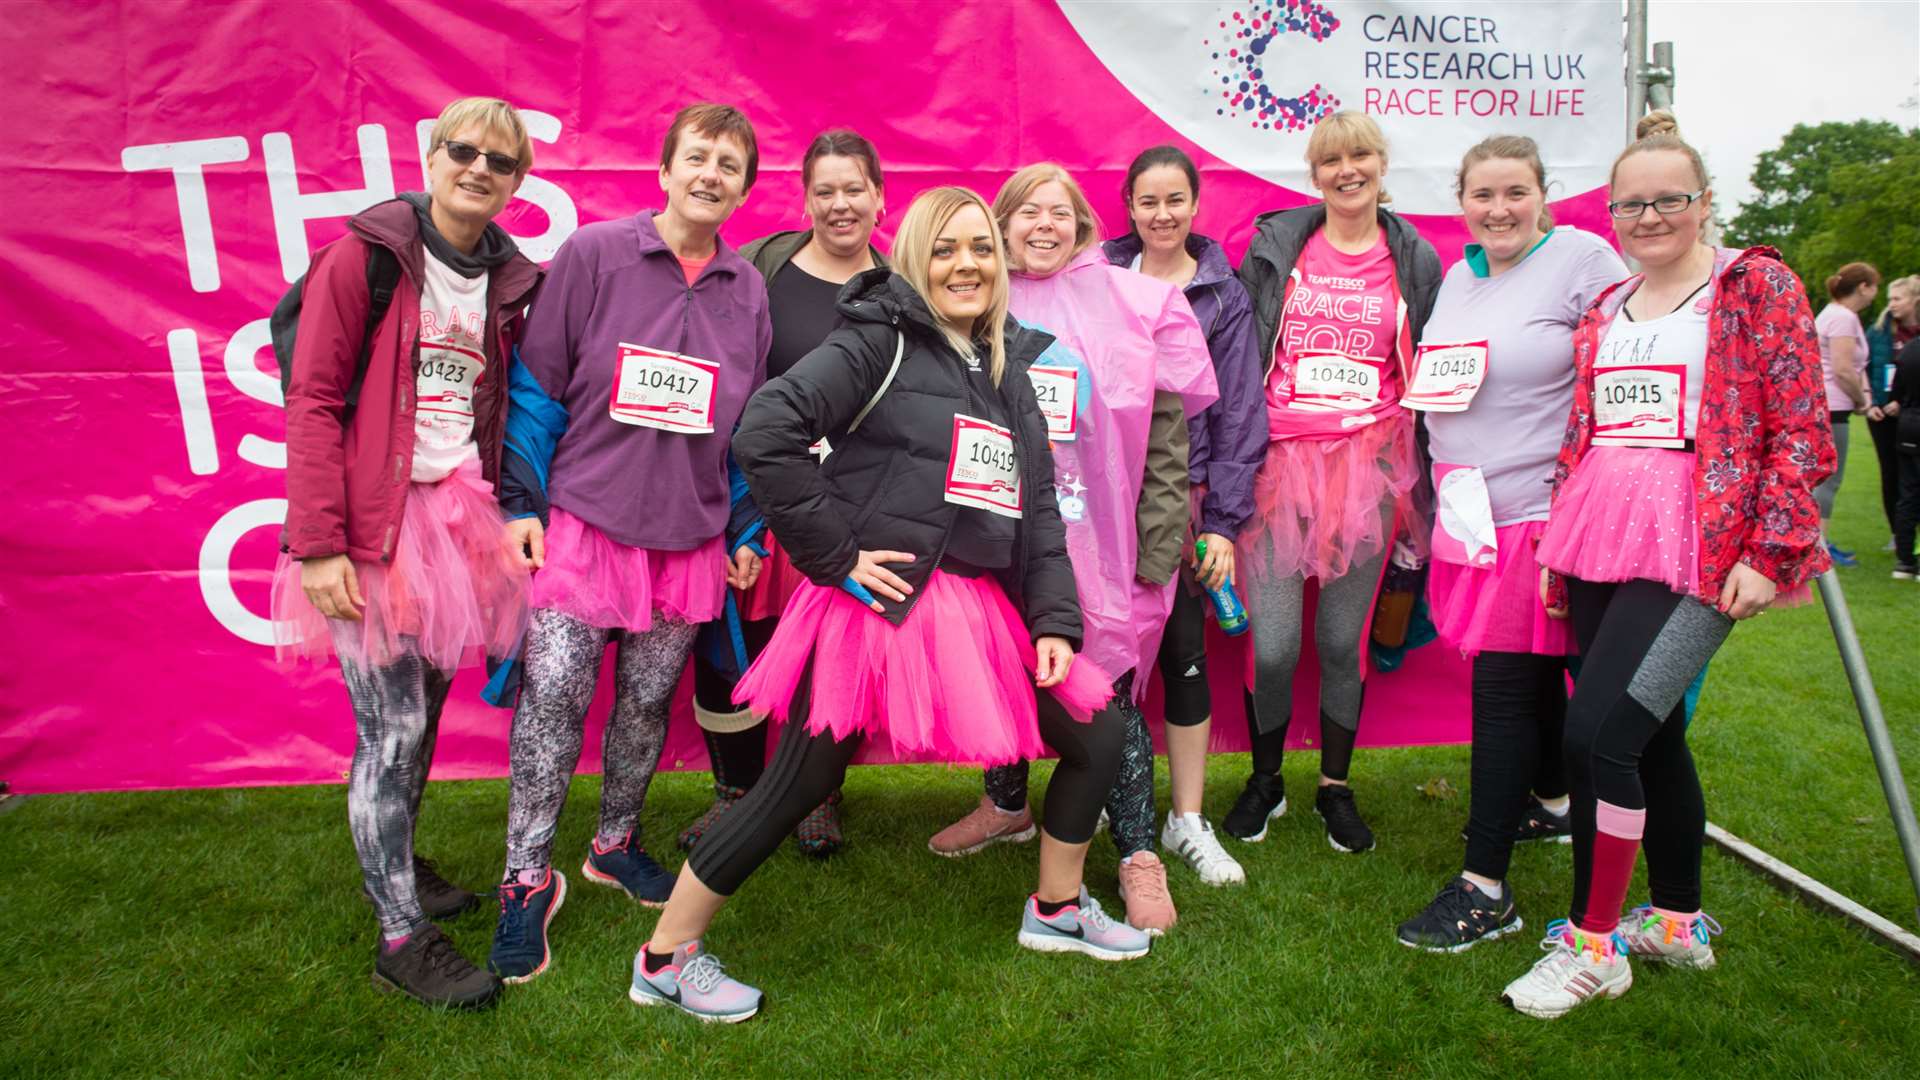 Participants at last year's Race for Life event in Inverness.